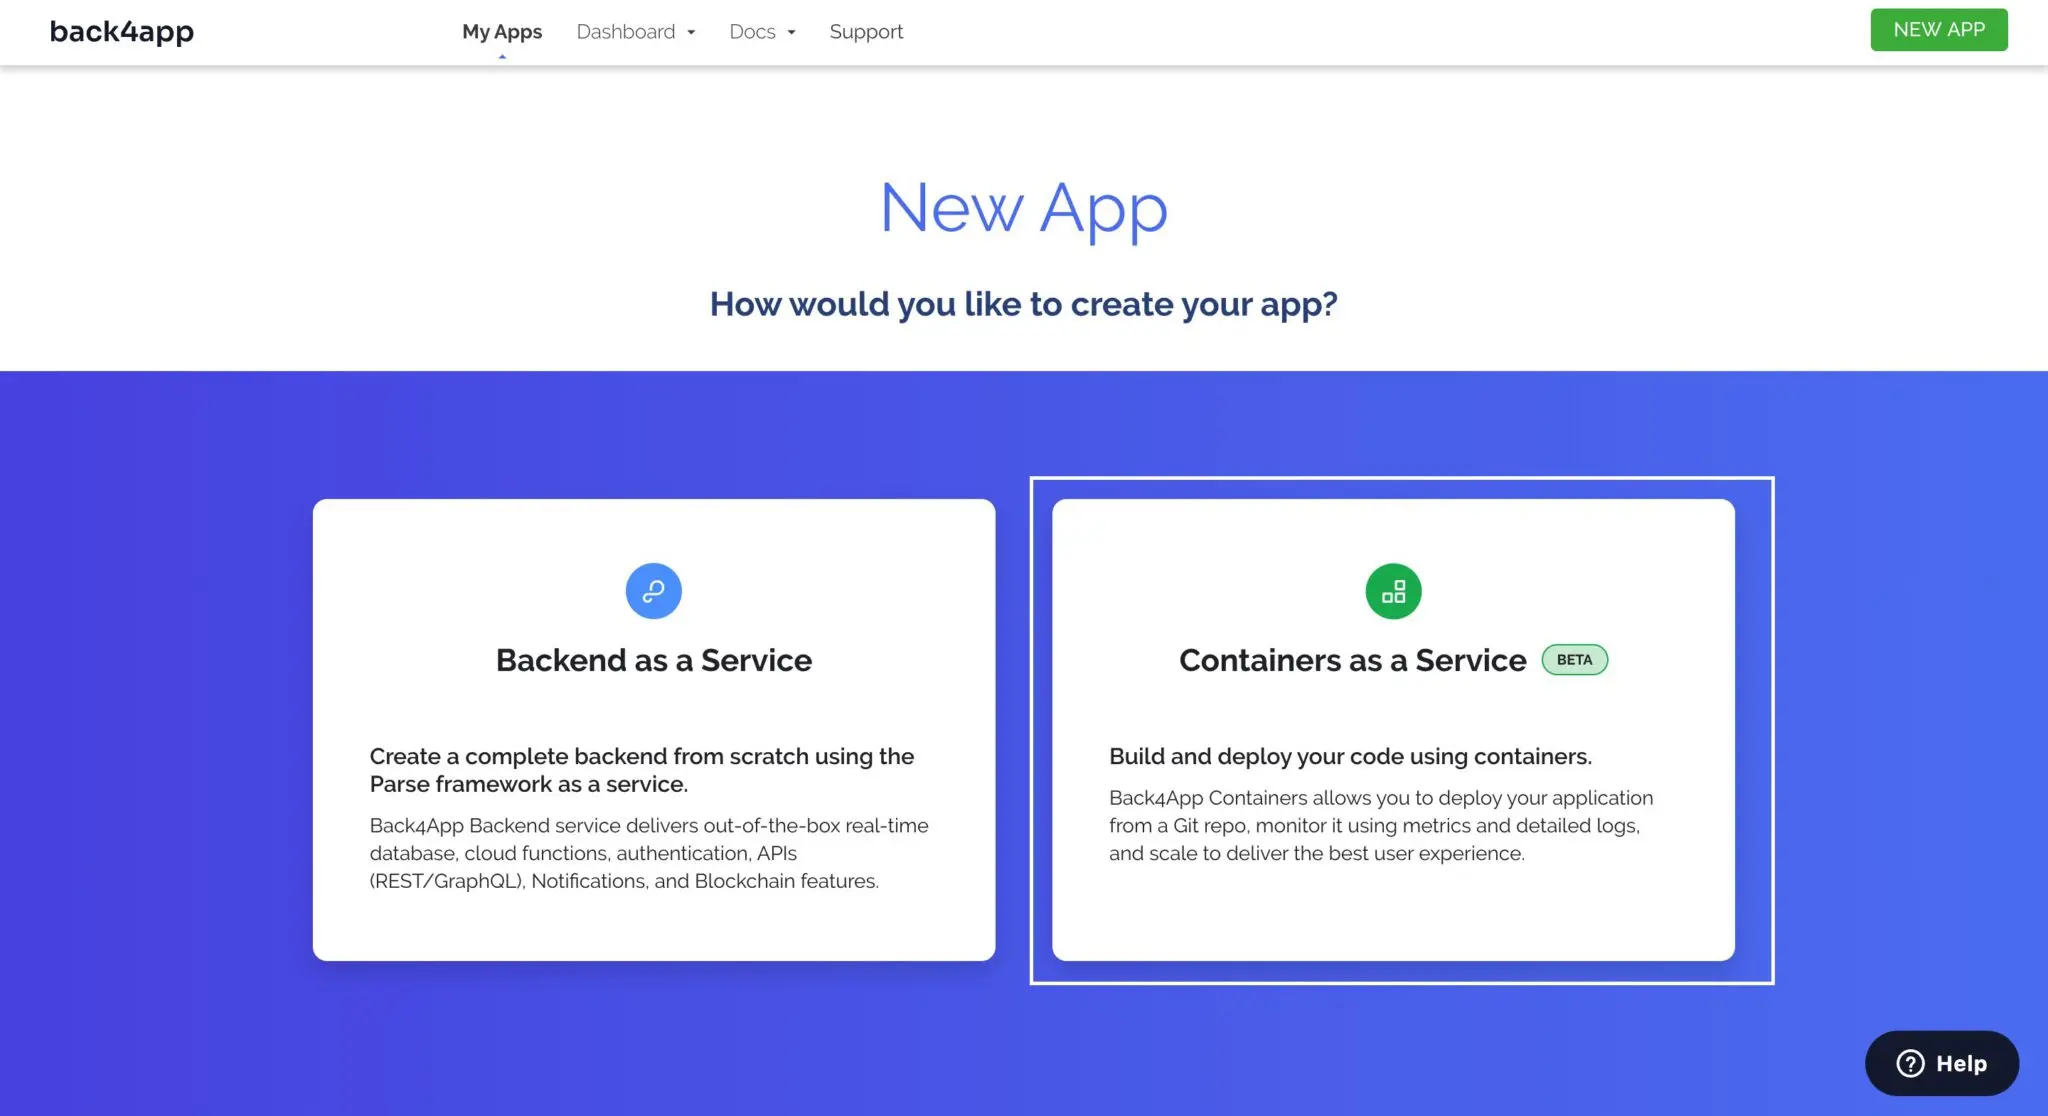 Selecting a back4app service